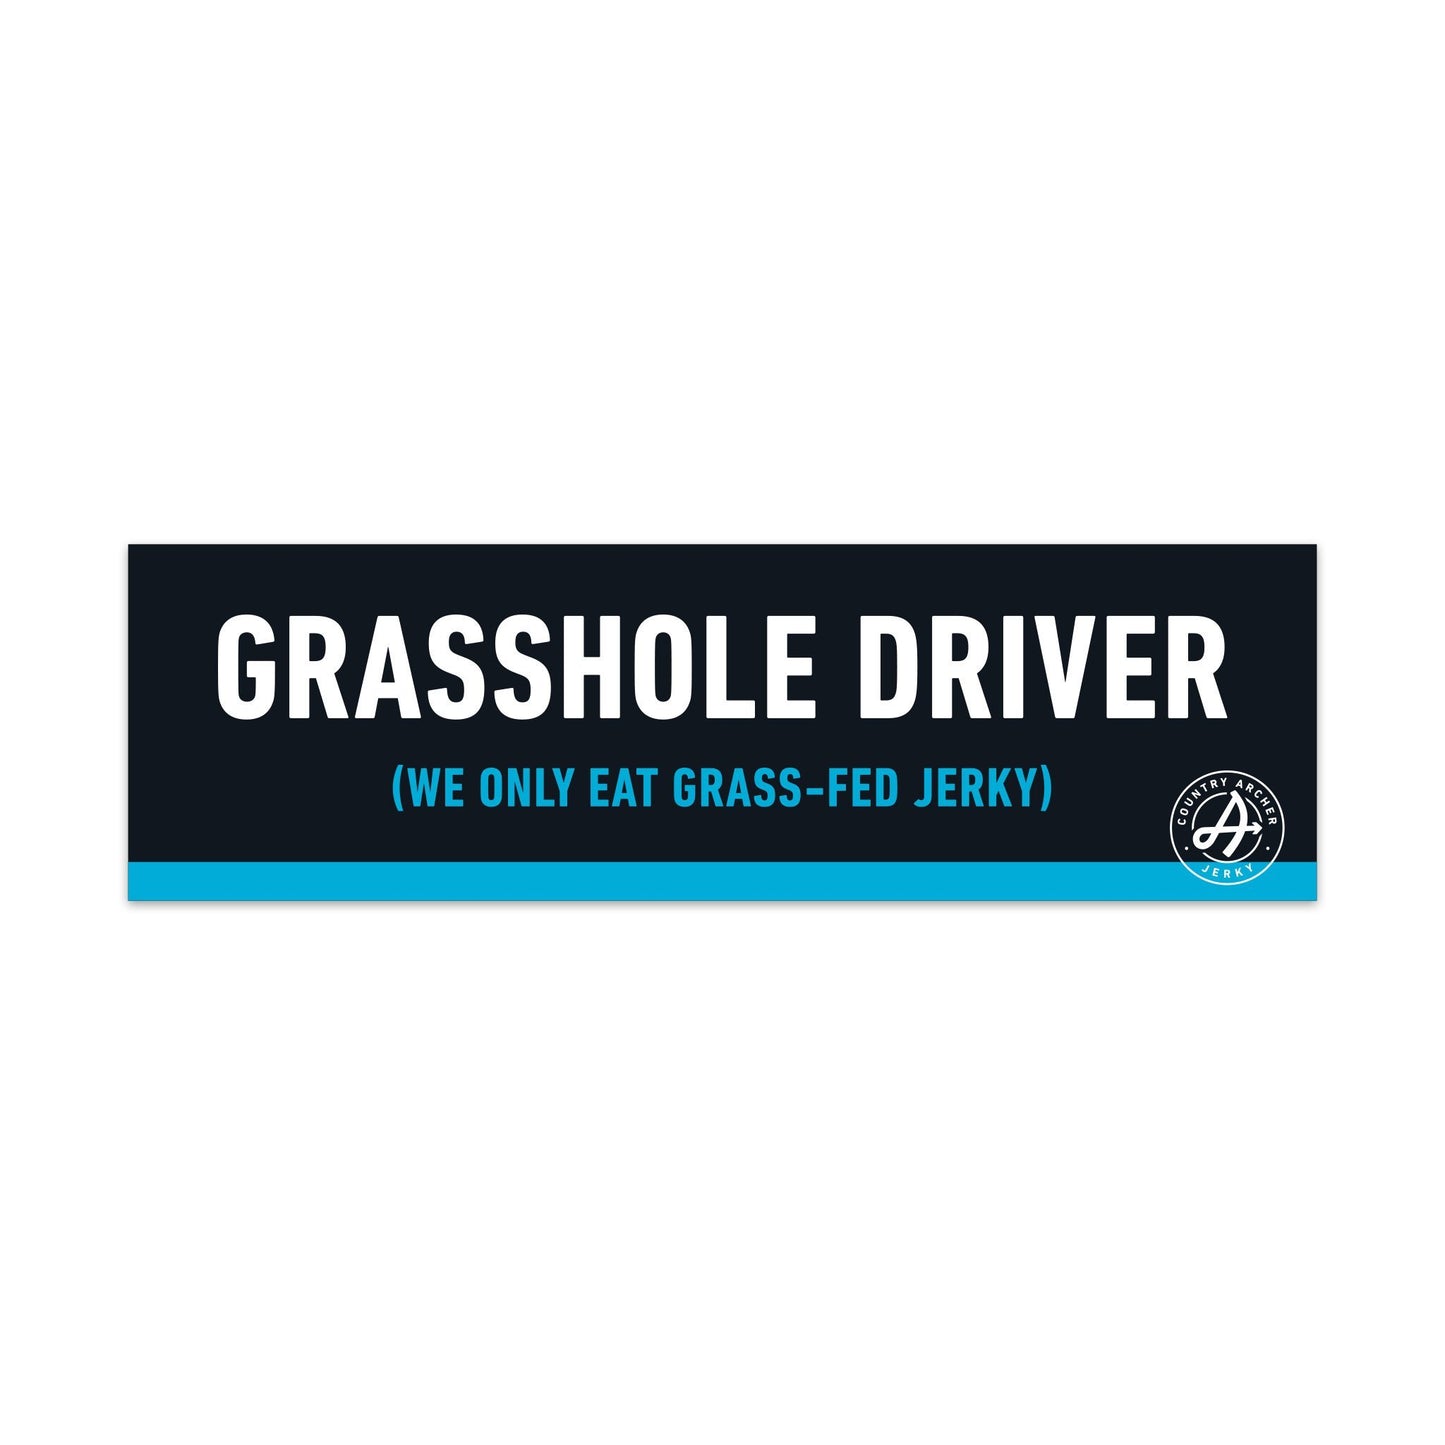  Grasshole Driver Bumper Sticker by Country Archer, 1 Sticker, gift, drive-like-a-grasshole-bumper-sticker, , 1 Sticker